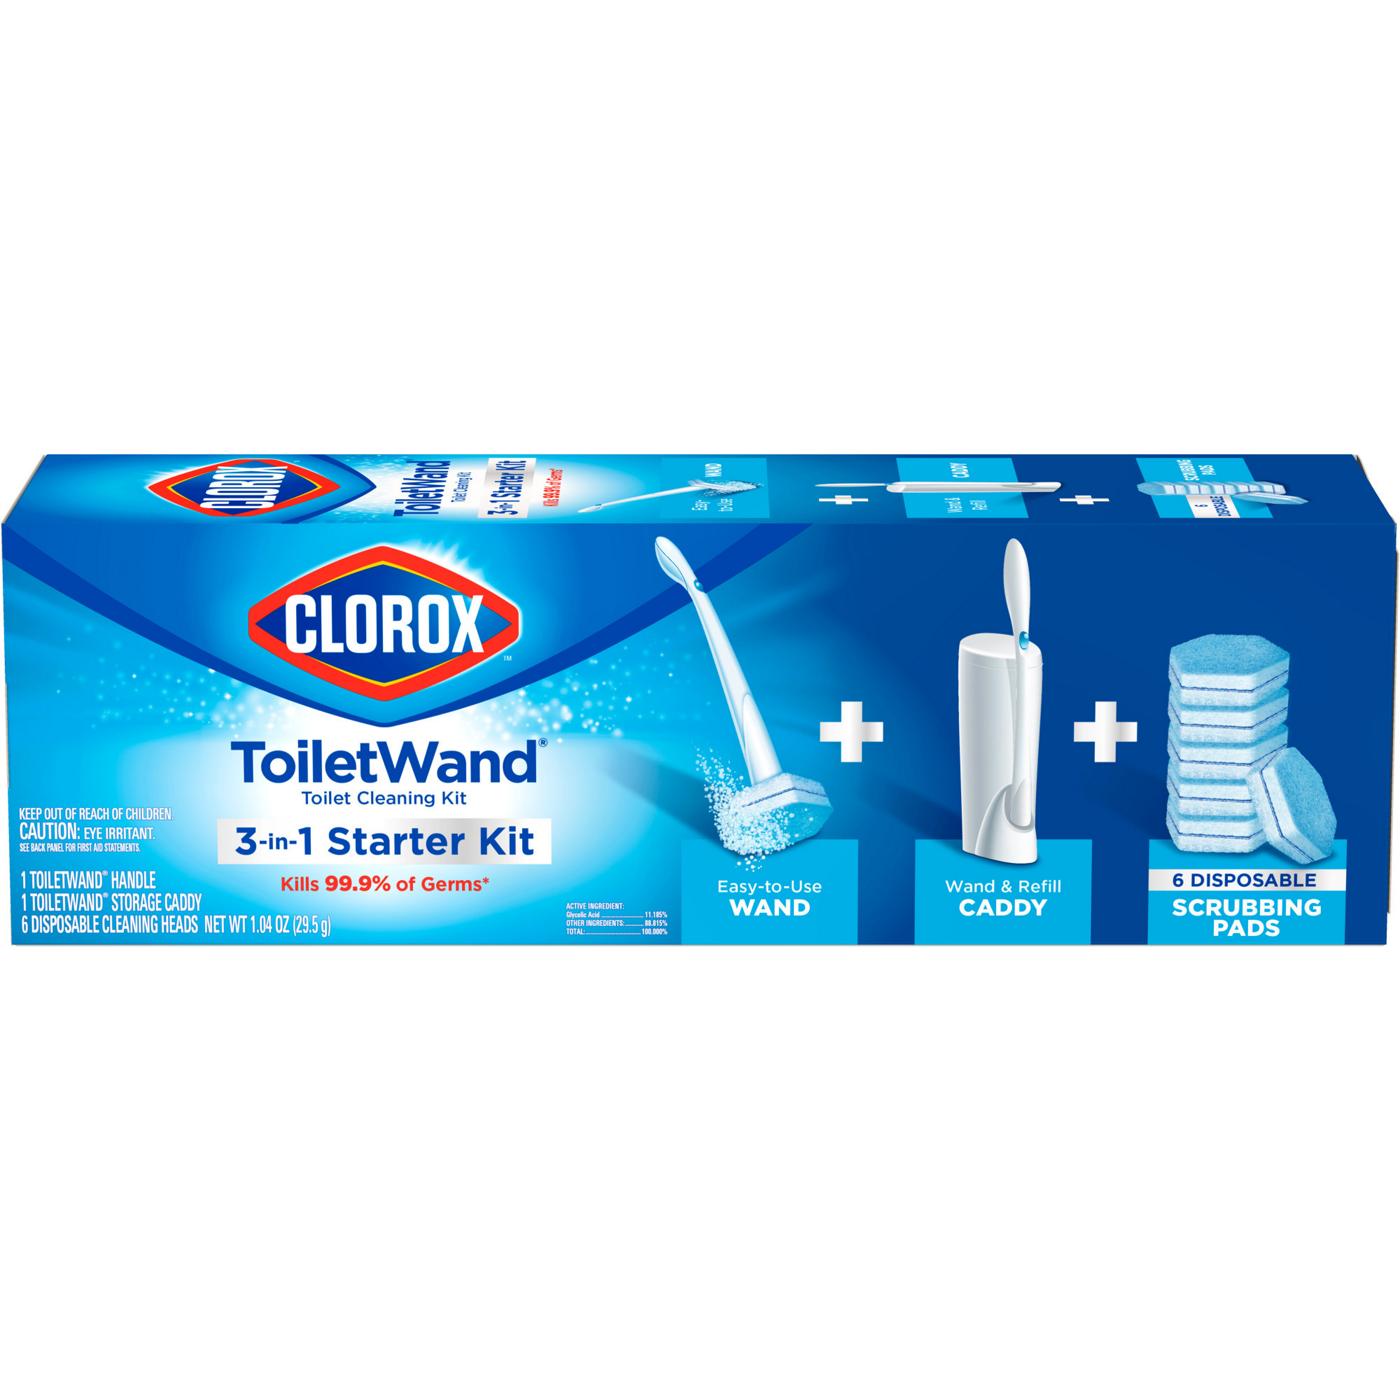 Clorox Toilet Wand 3-in-1 Starter Kit; image 1 of 9